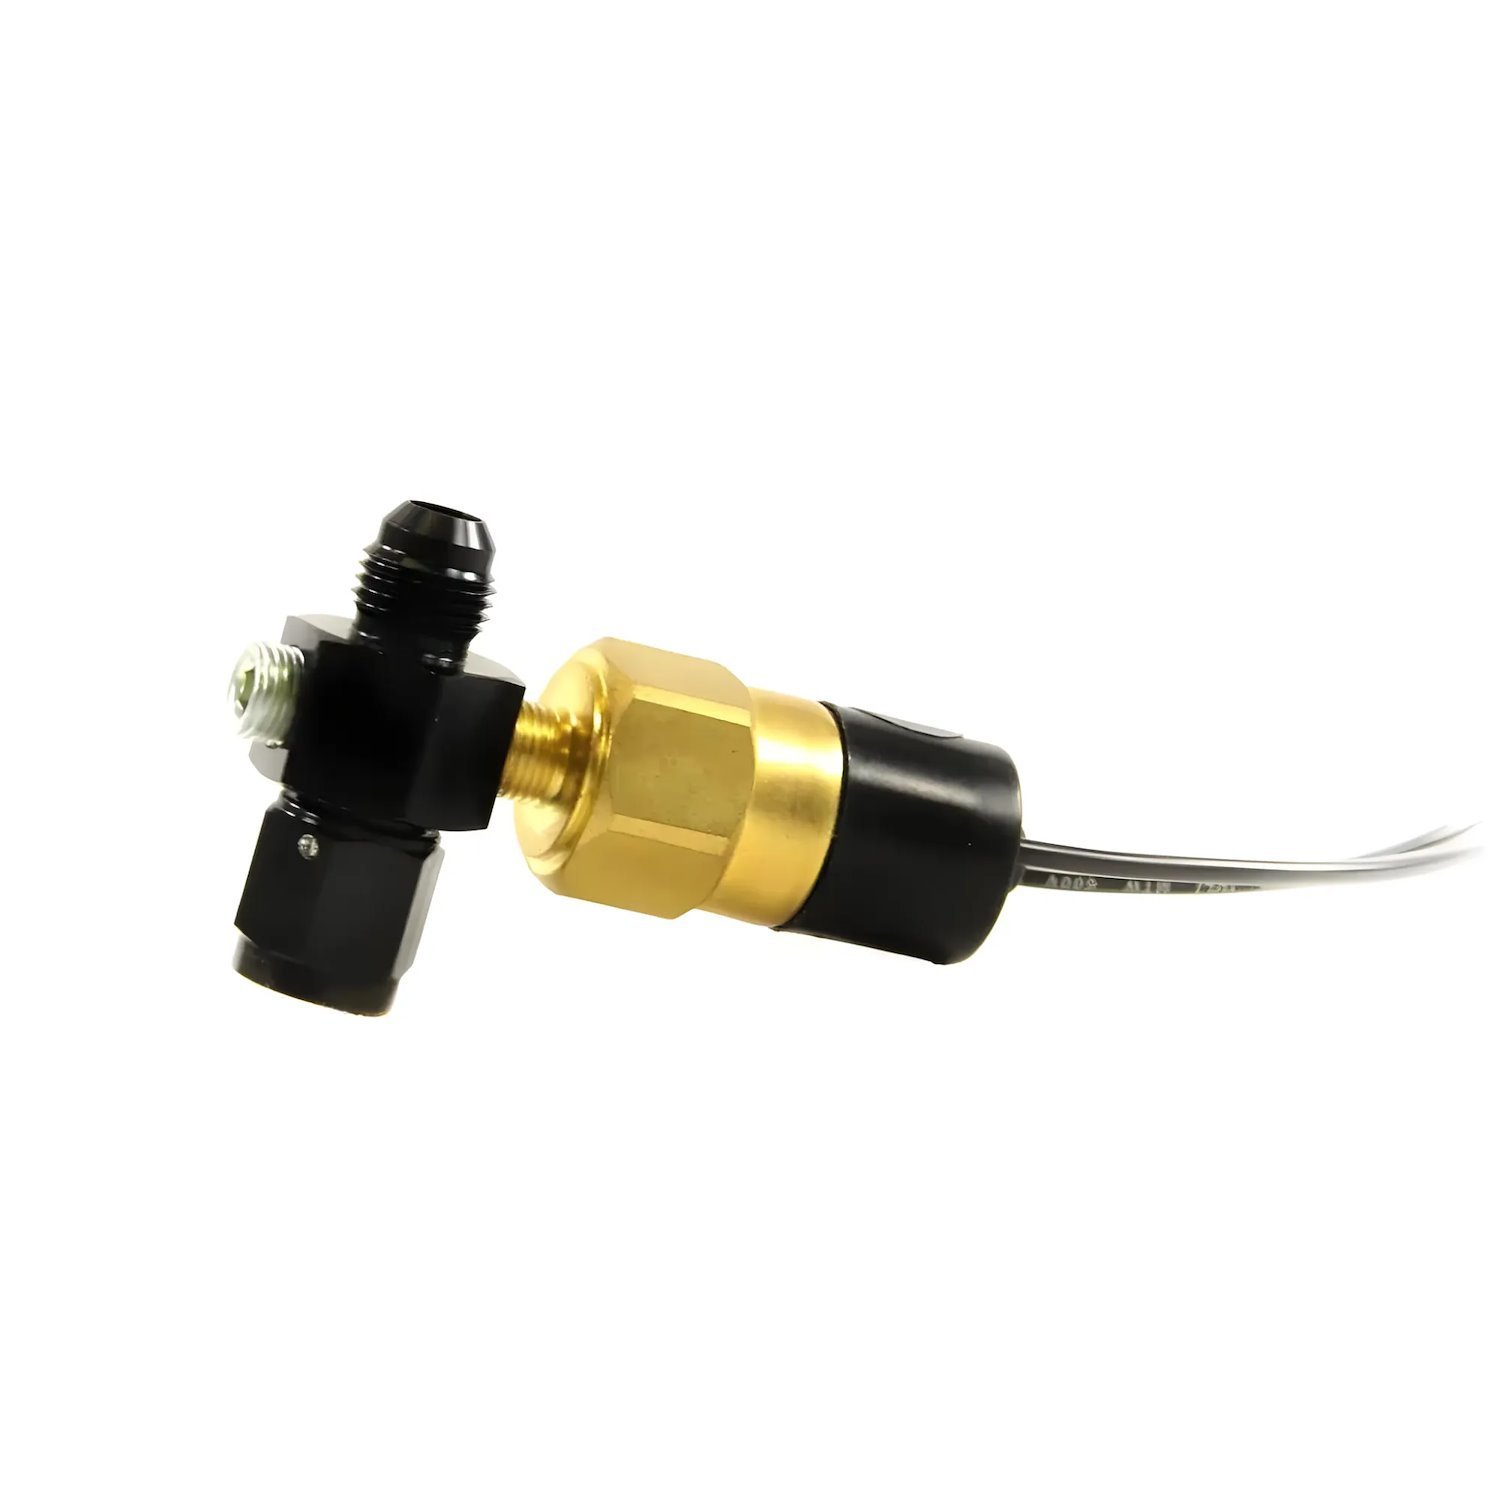 00-60000-4 Fuel Pressure Safety Switch, 4AN Manifold/Low Pressure/Preset 5 psi/Adjustable 1.5-20 psi.